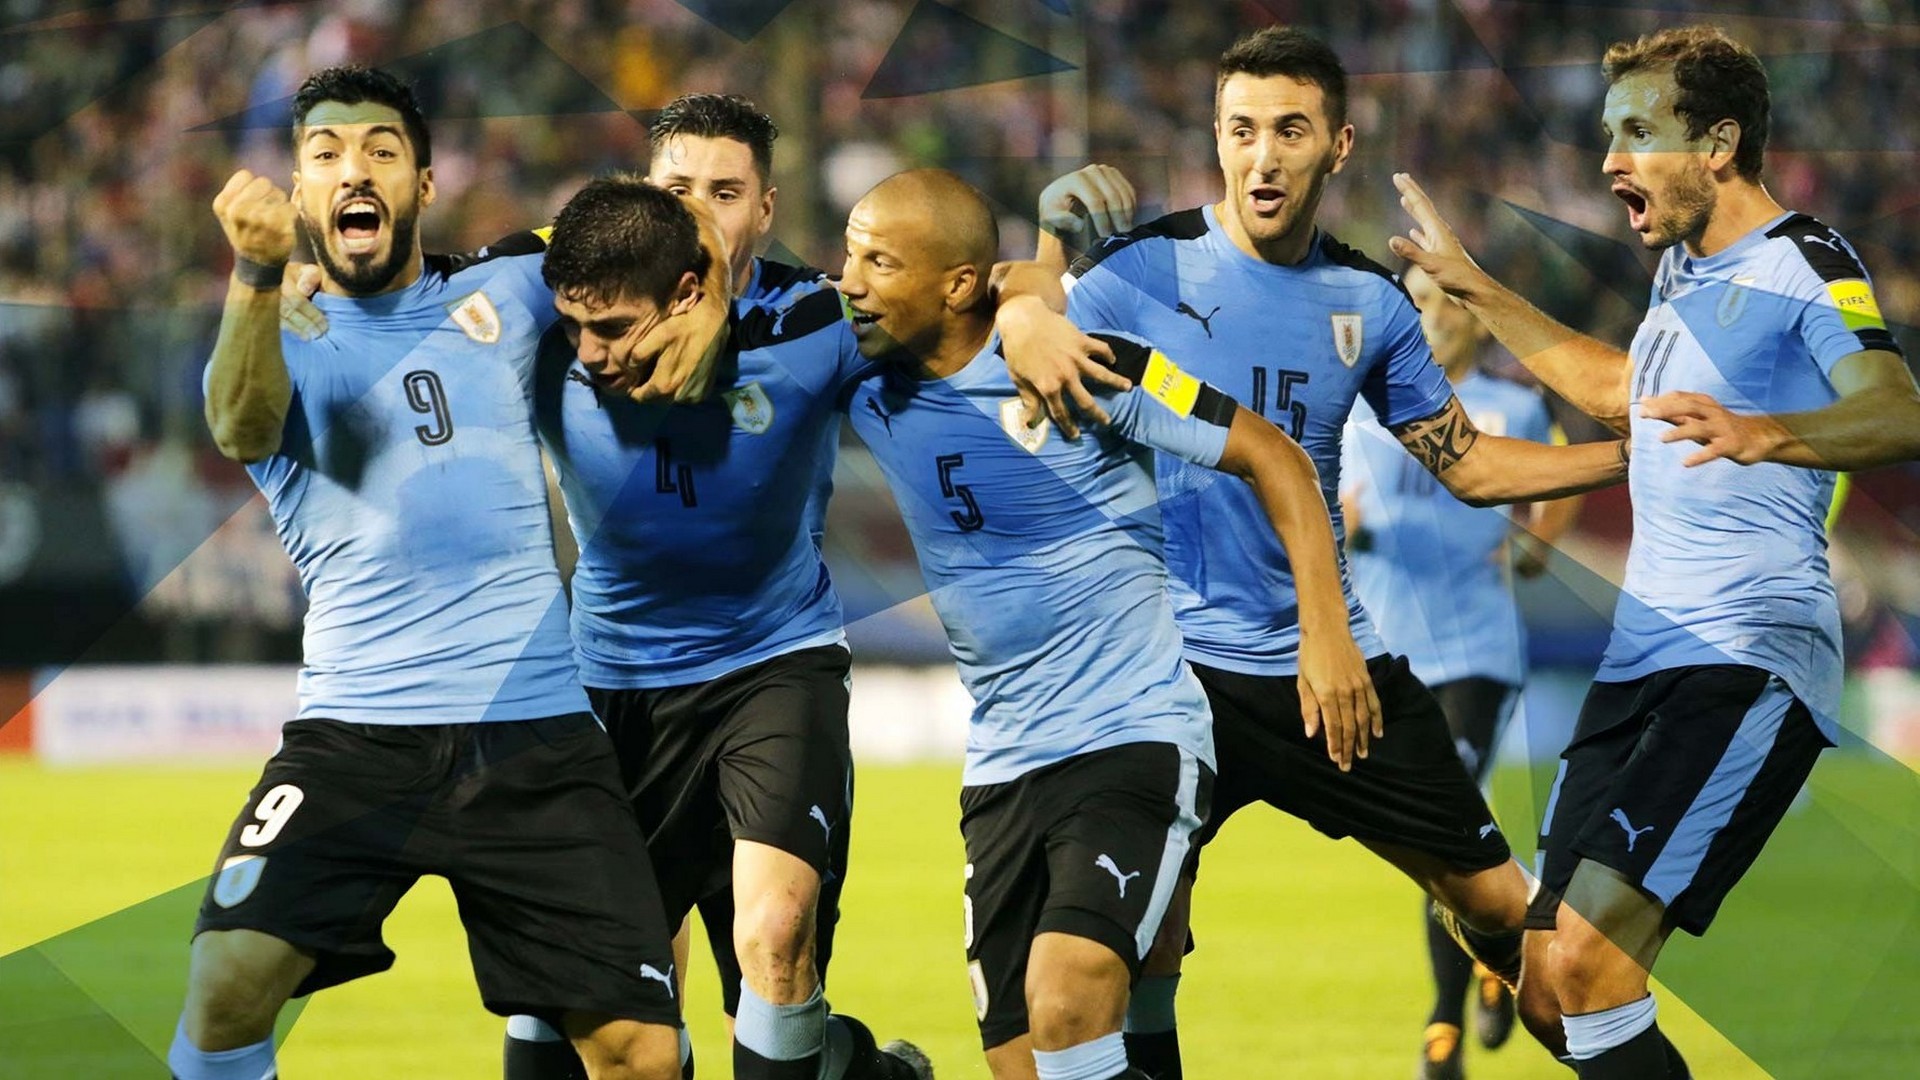 Uruguay National Team Wallpaper For Desktop with image resolution 1920x1080 pixel. You can use this wallpaper as background for your desktop Computer Screensavers, Android or iPhone smartphones